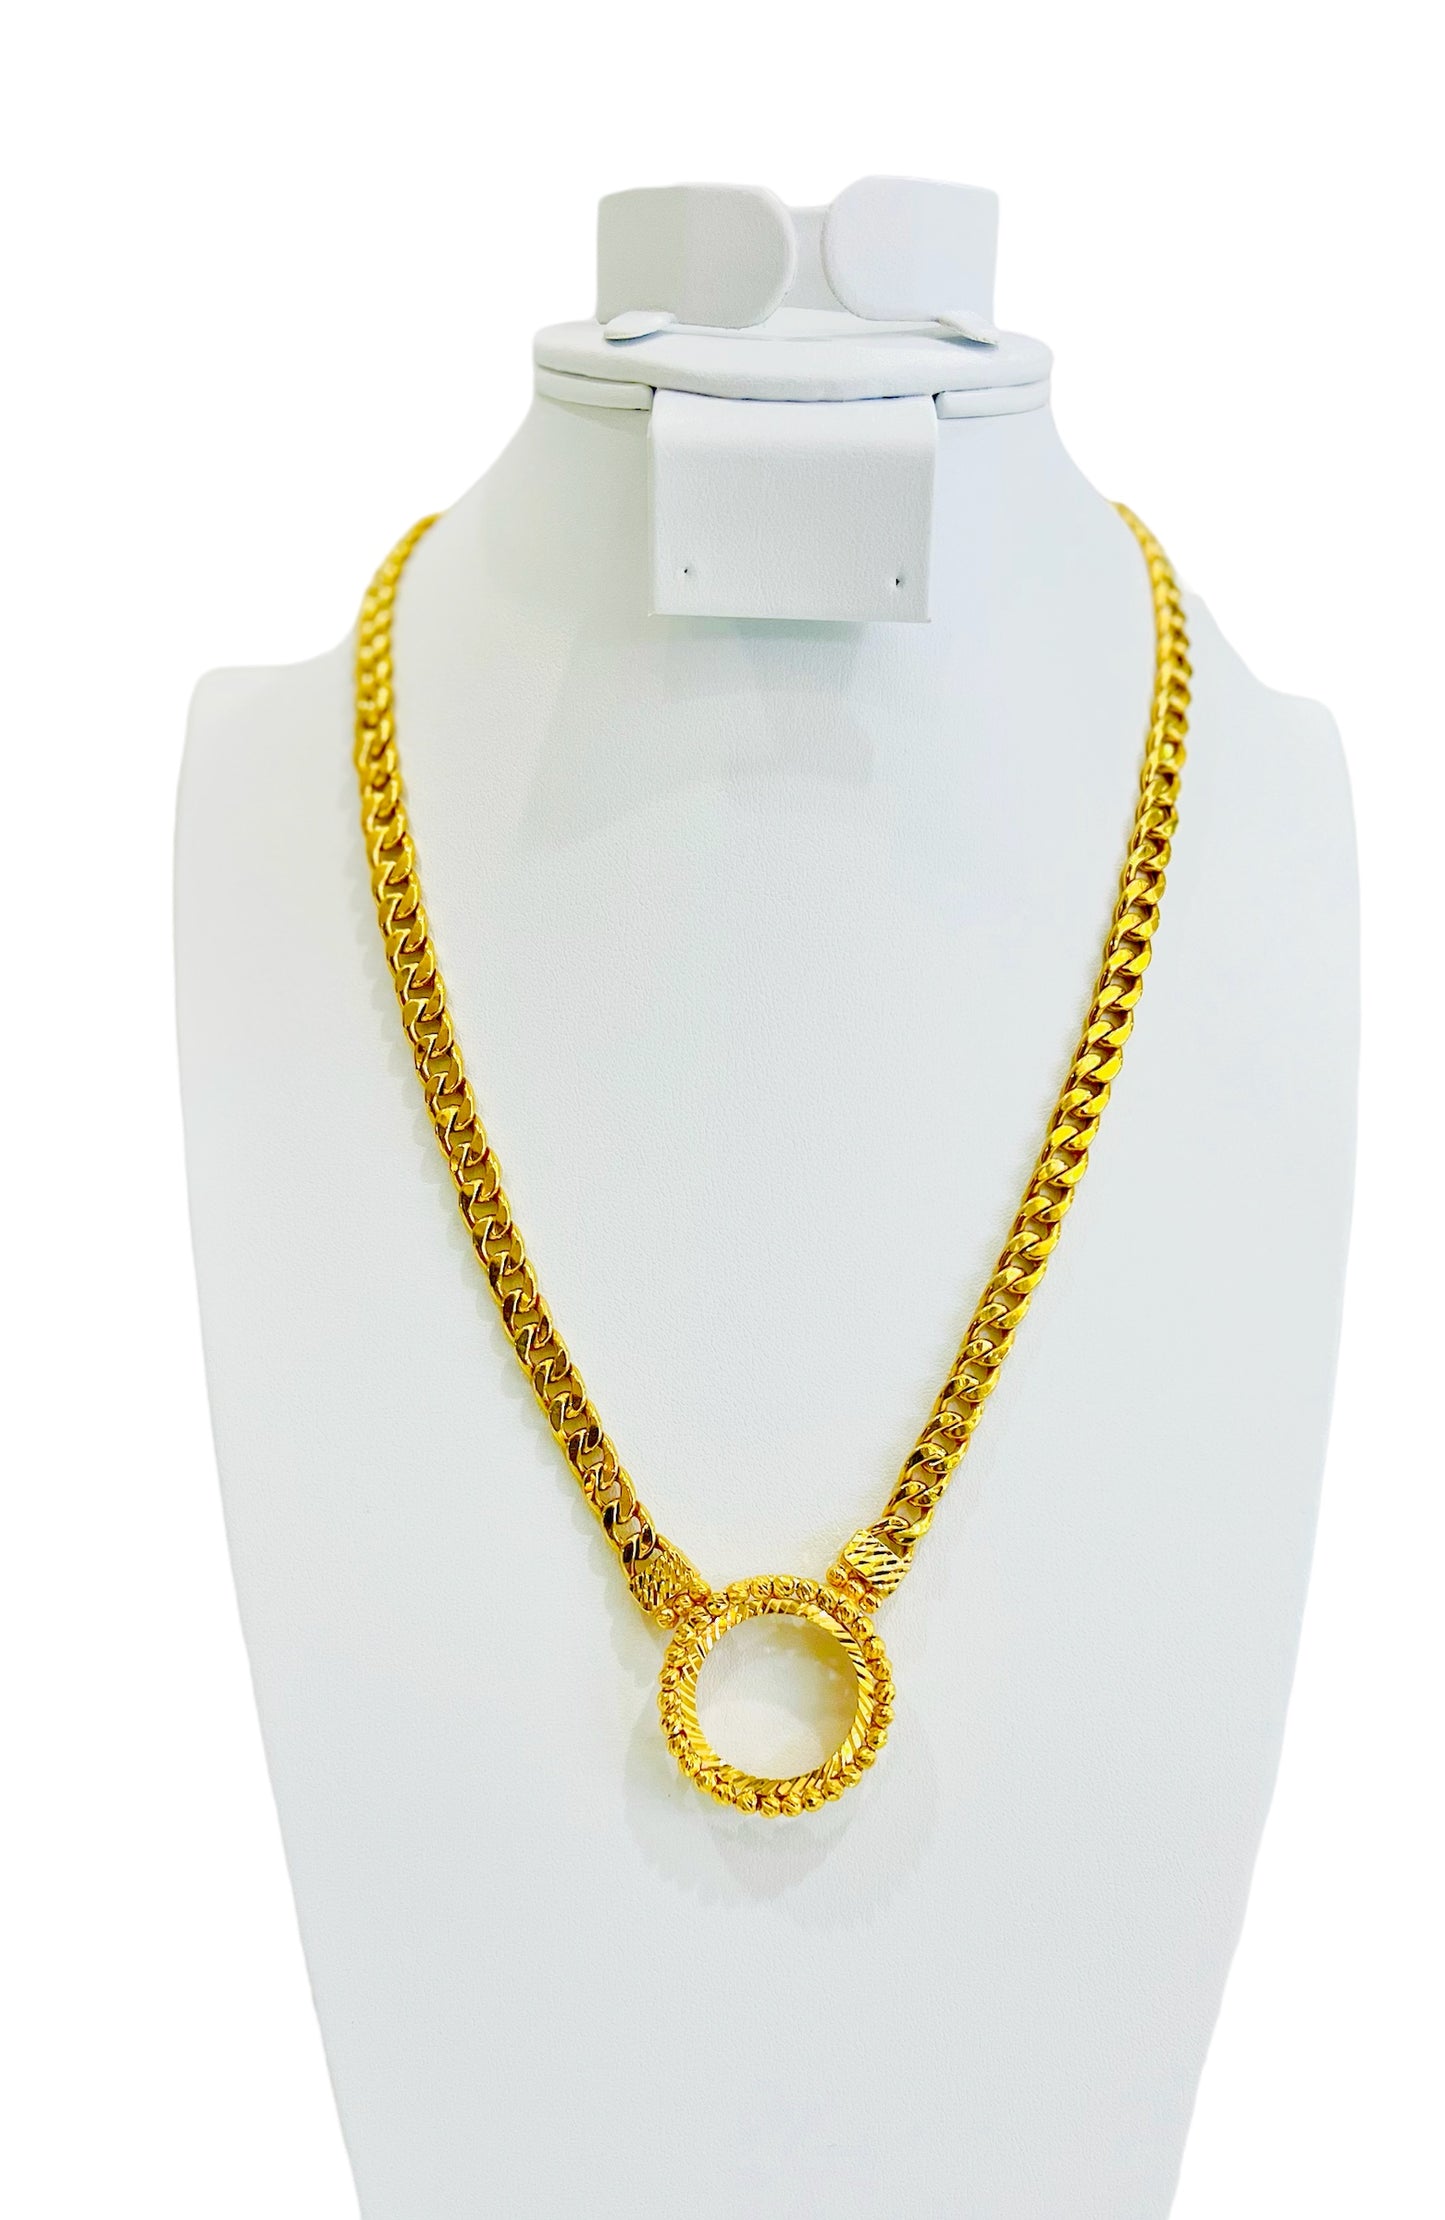 21k Gold Himo Coin Necklace